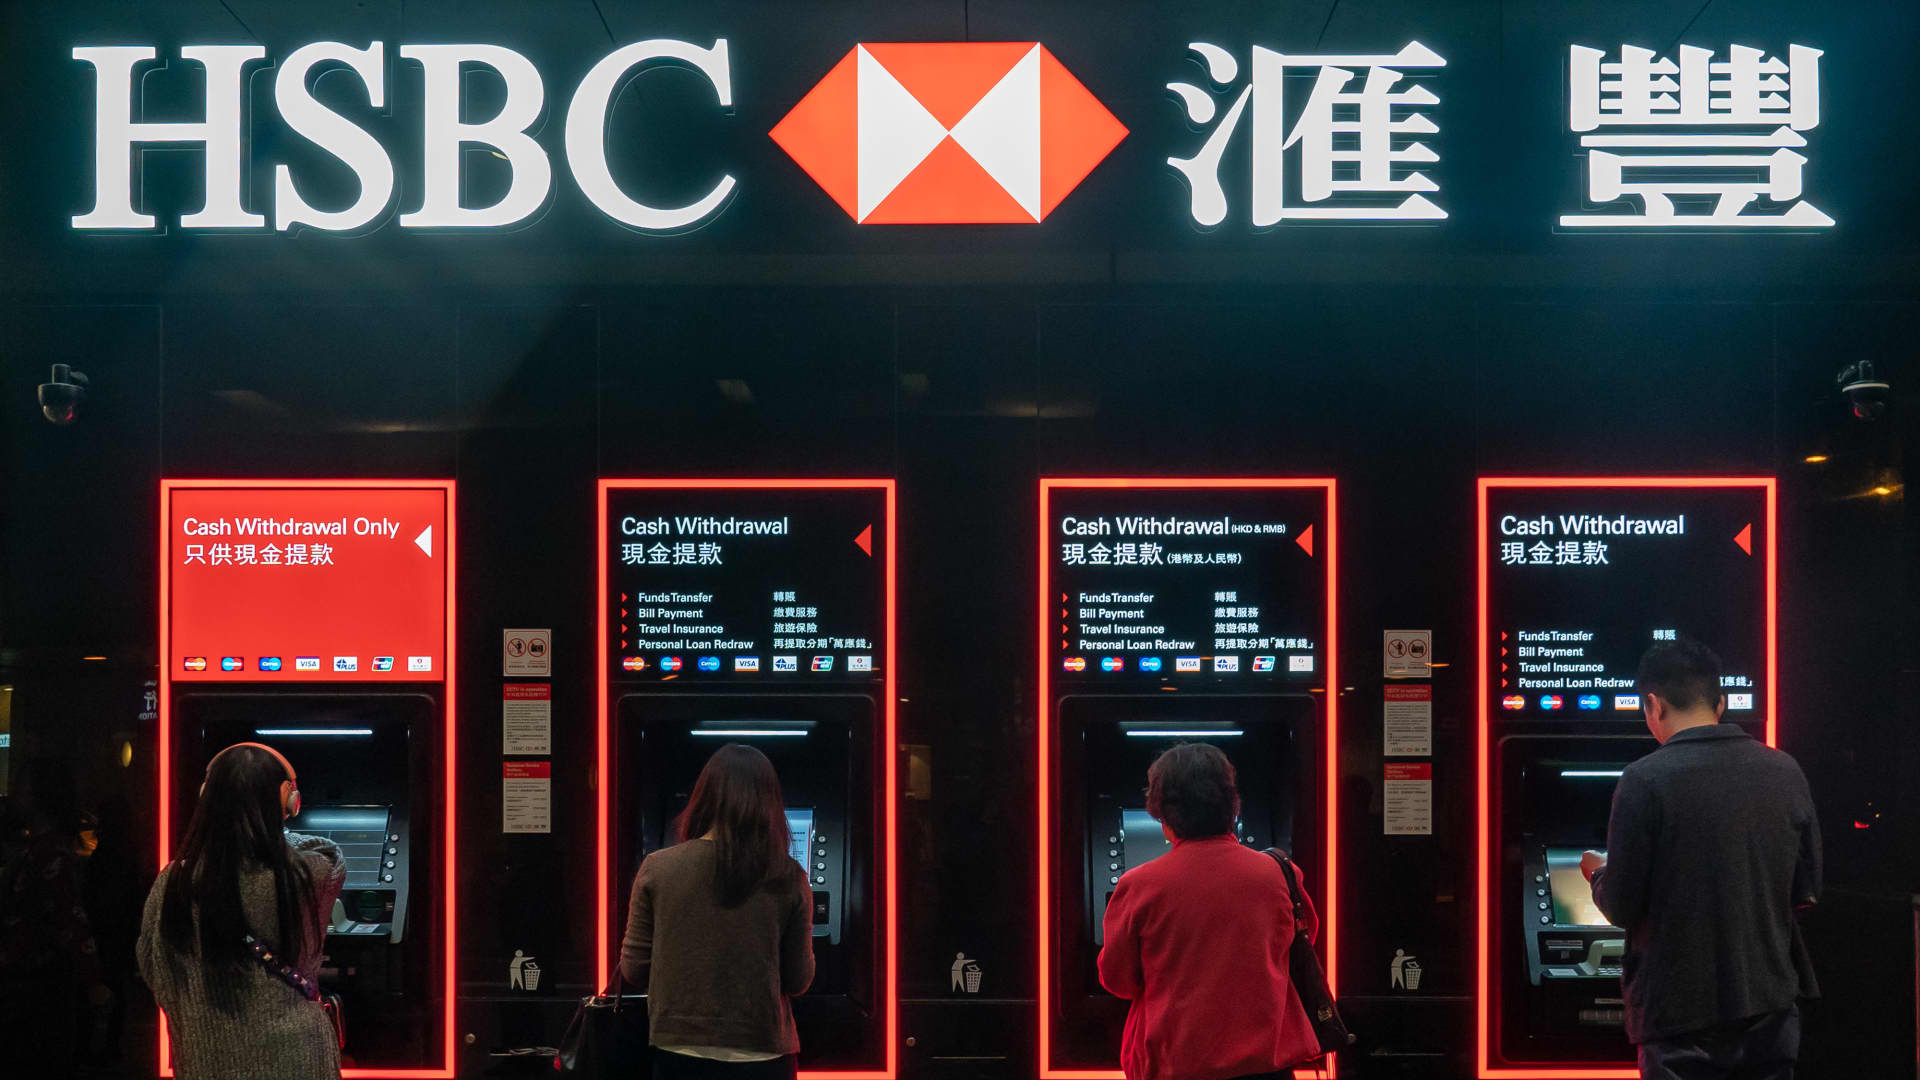 HSBC shares are falling on reports that top shareholder Ping An could sell shares